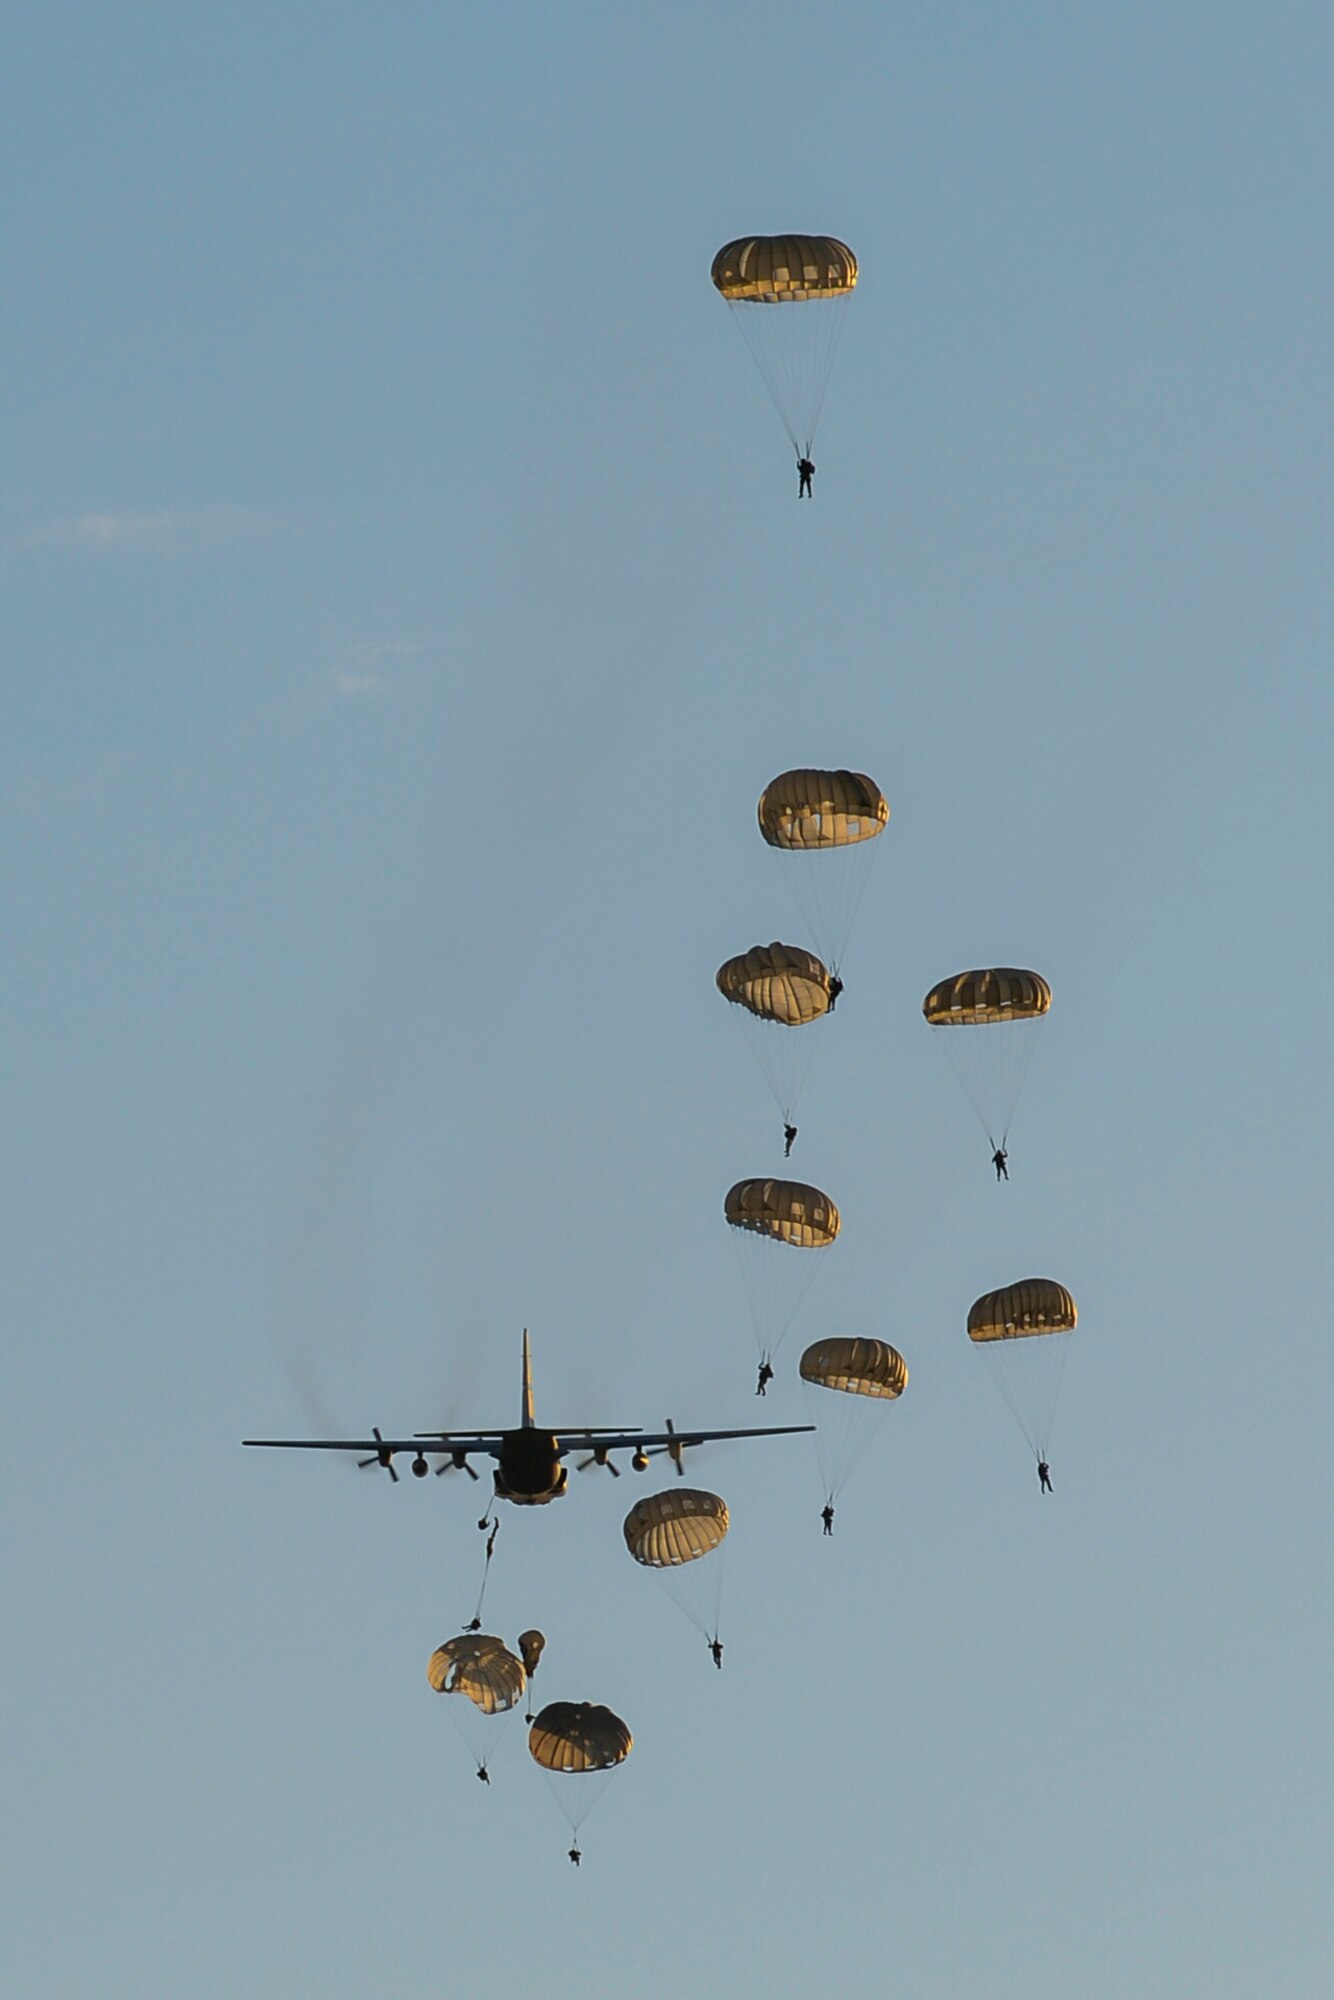 U.S. Army Soldiers with the 7th Special Forces Group perform static-line parachute jumps out of a C-130H3 Hercules during Emerald Warrior 2015 at Eglin Air Force Base, Fla., April 21, 2015. Emerald Warrior is the Department of Defense's only irregular warfare exercise, allowing joint and combined partners to train together and prepare for real-world contingency operations. (U.S. Air Force photo by Staff Sgt. Jamal D. Sutter/Released)
